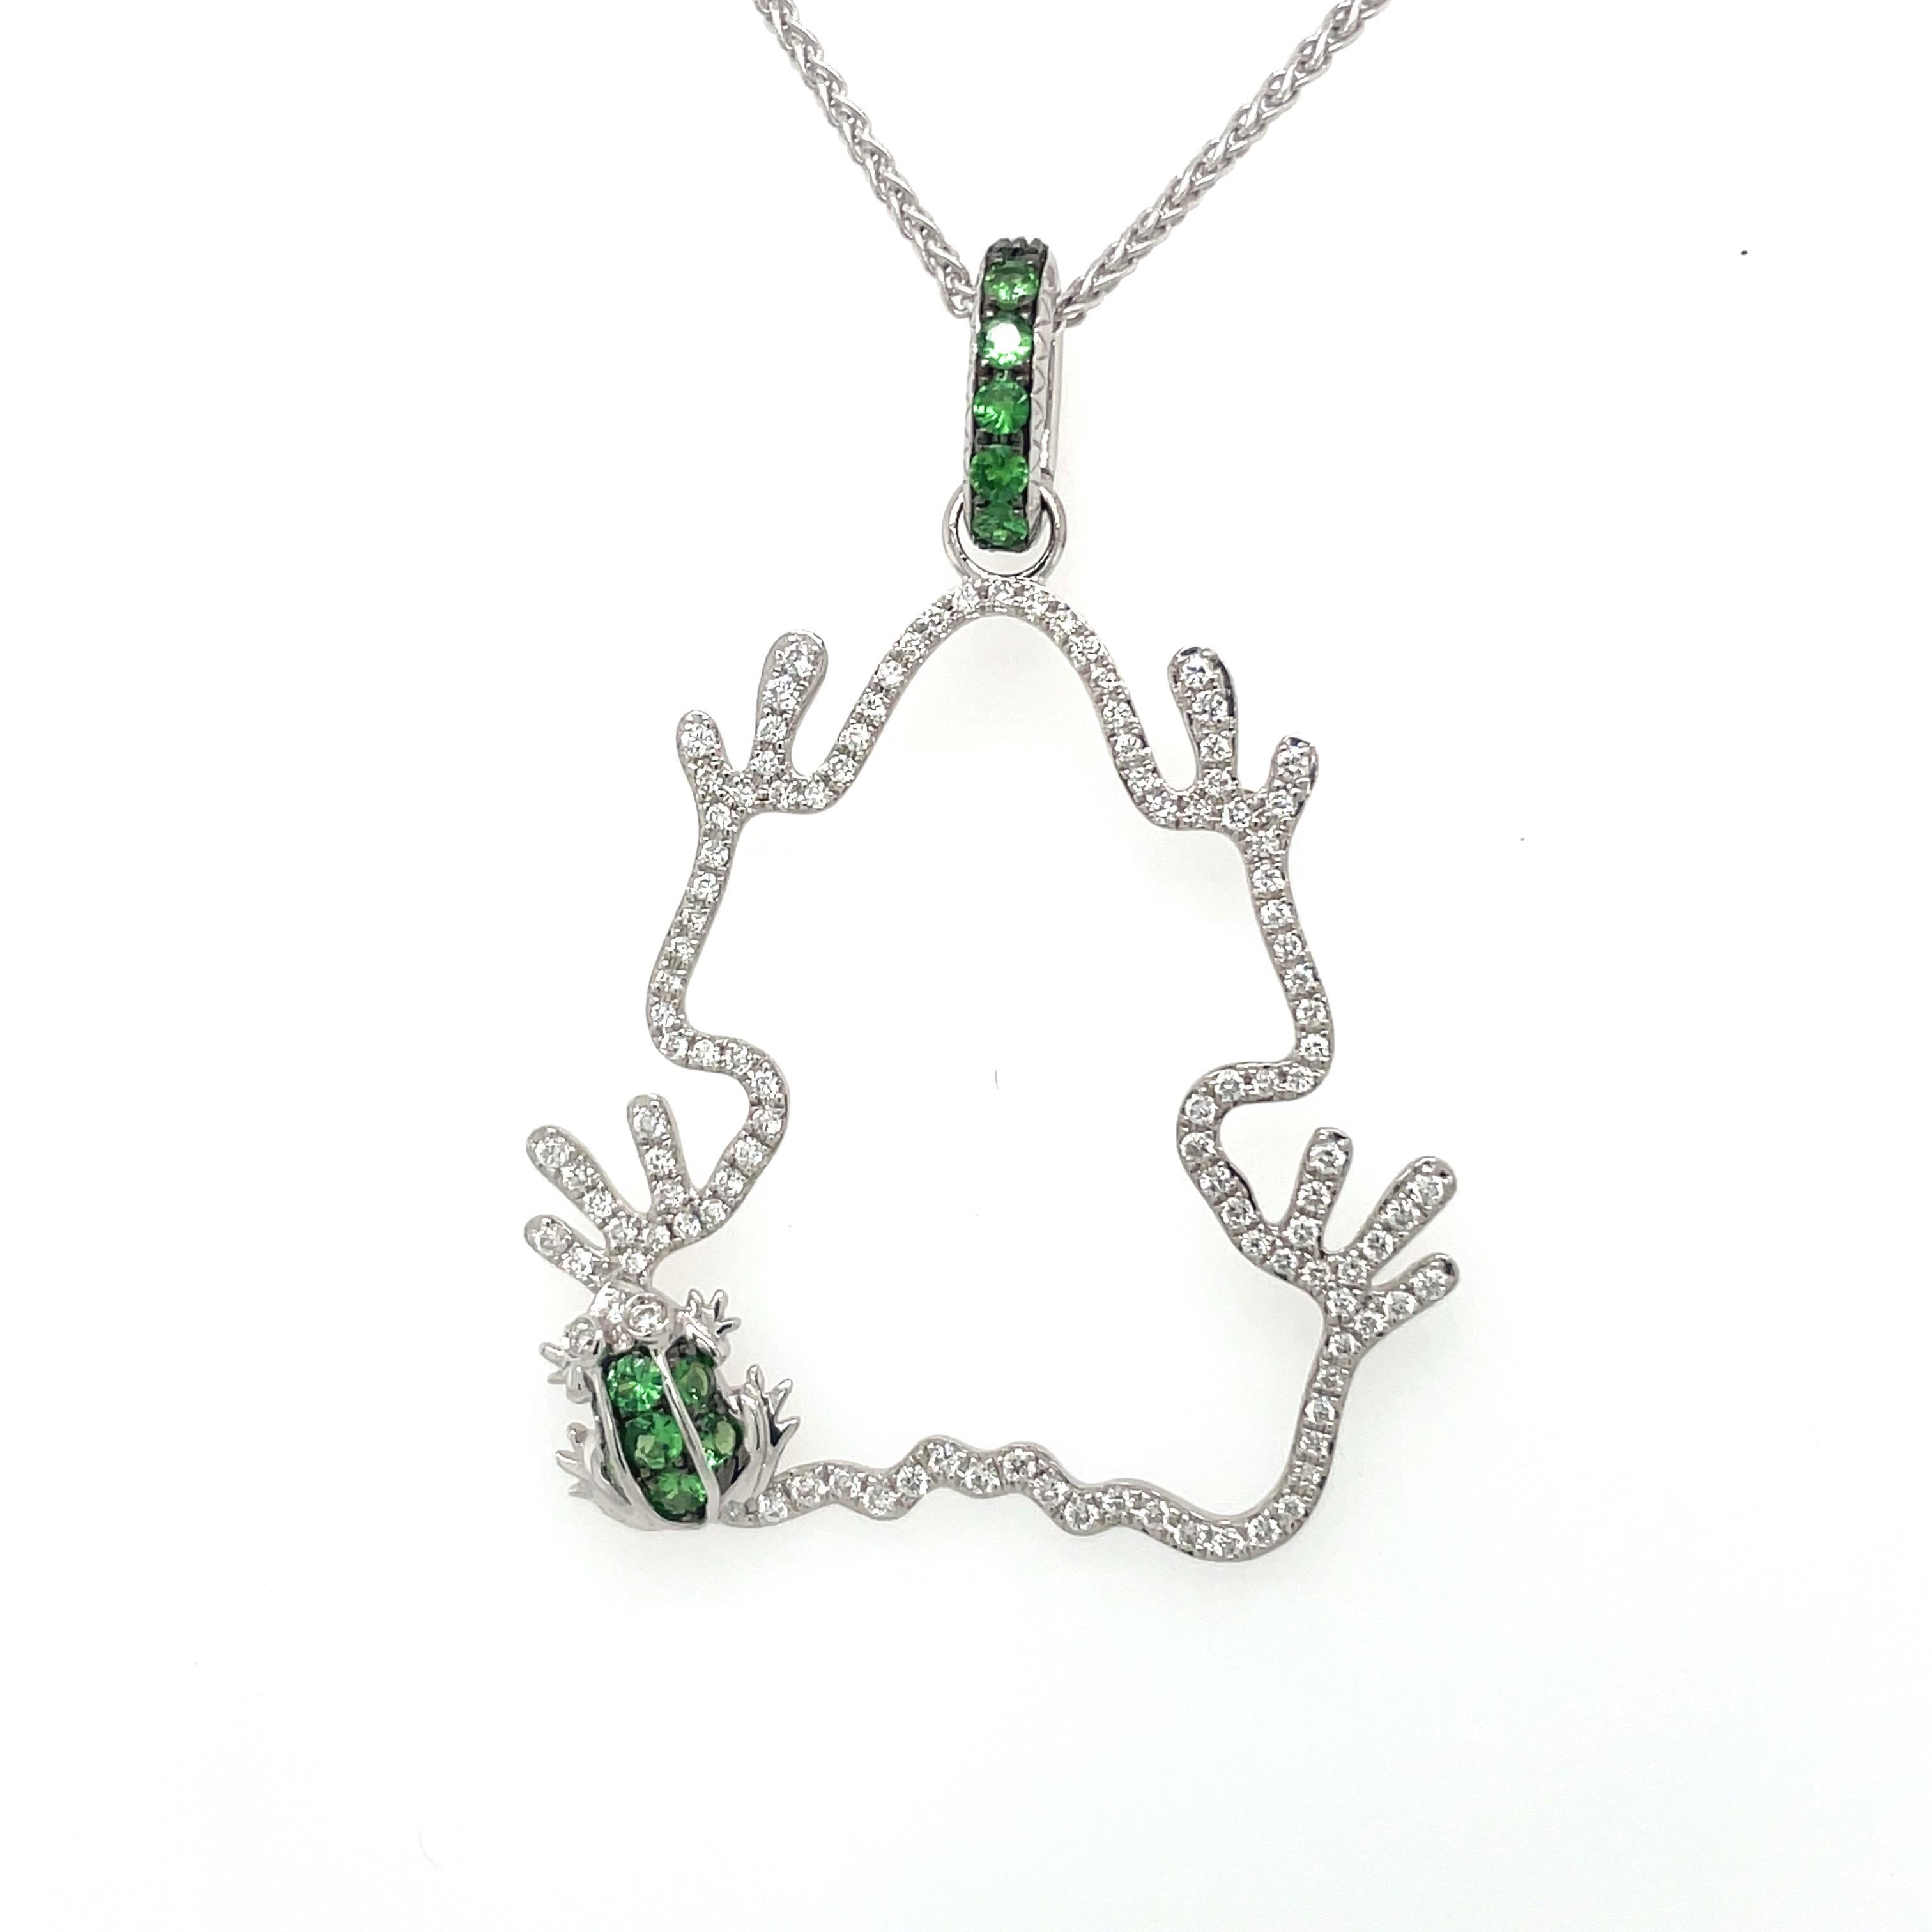 In the natural world, Frog can easily switch between water and land and is associated with springtime, renewal, and the changing of the seasons. ... Frogs also represent wealth, abundance, ancient wisdom, rebirth, and good luck. This lucky frog is